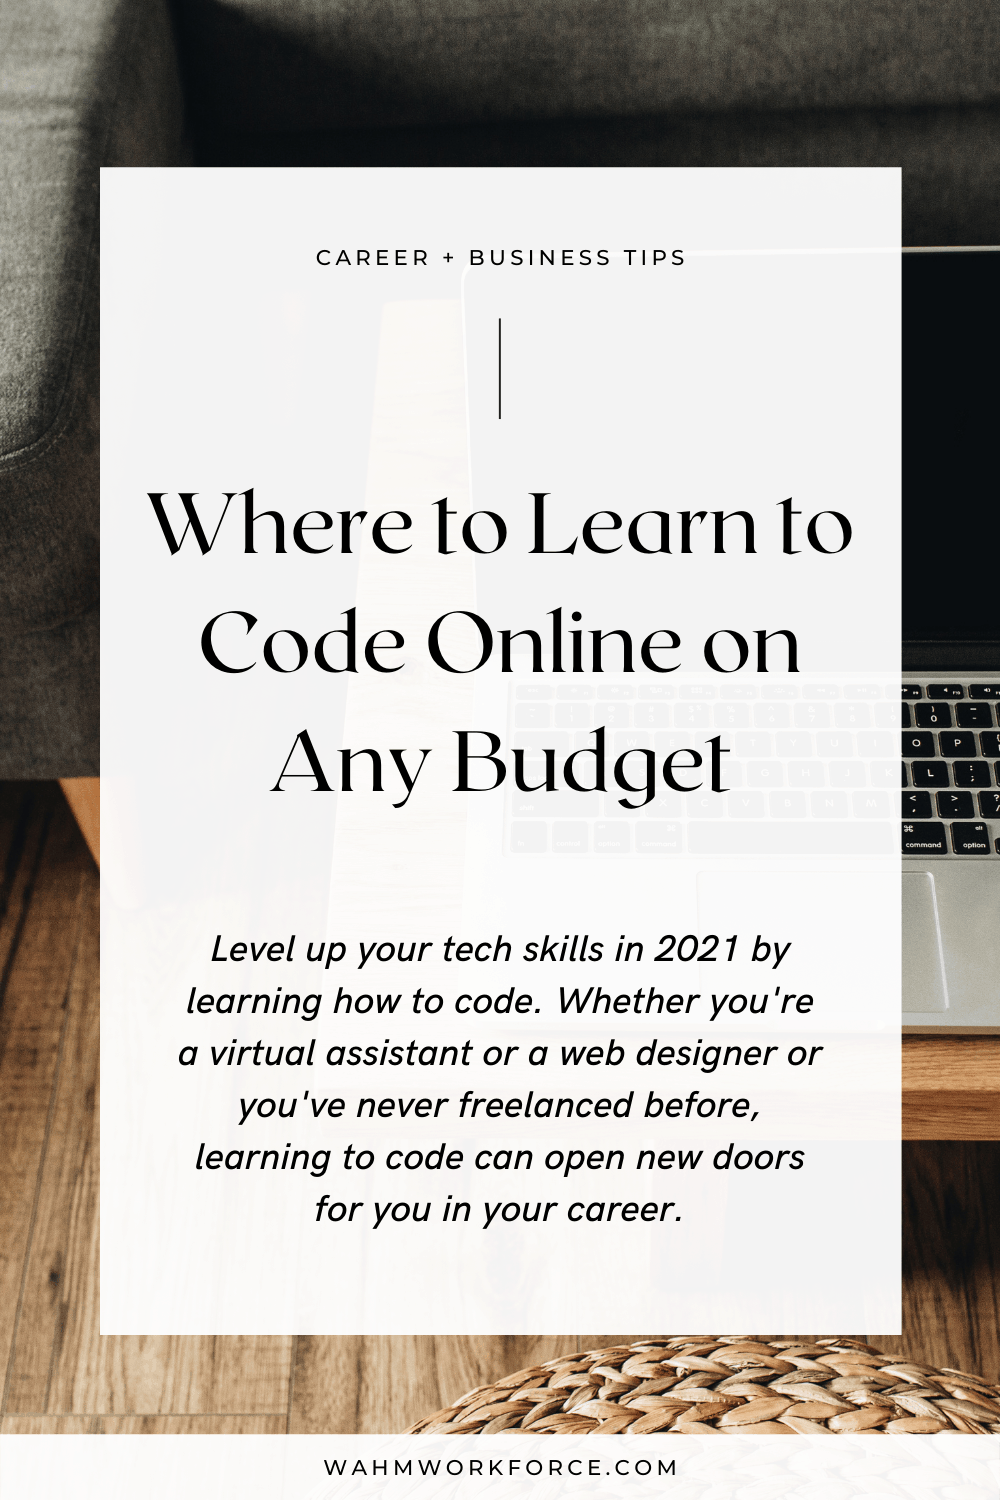 10 Places to Learn to Code Online Even if you Have No Experience (Free + Paid Options)